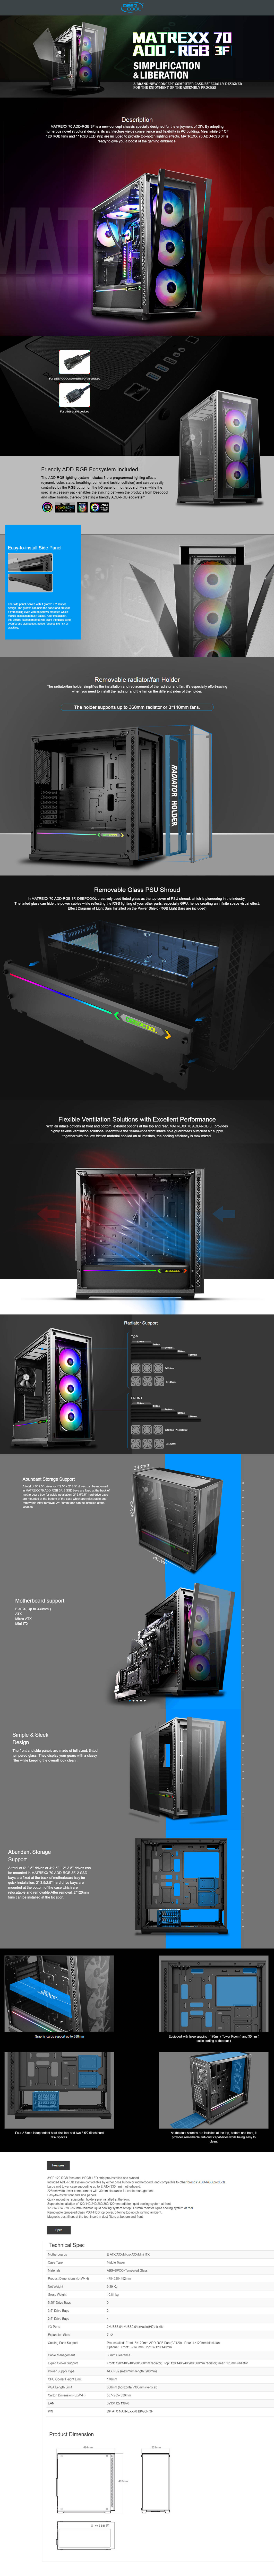 Buy Online Deepcool MATREXX 70 ADD-RGB 3F Middle Tower Computer Case